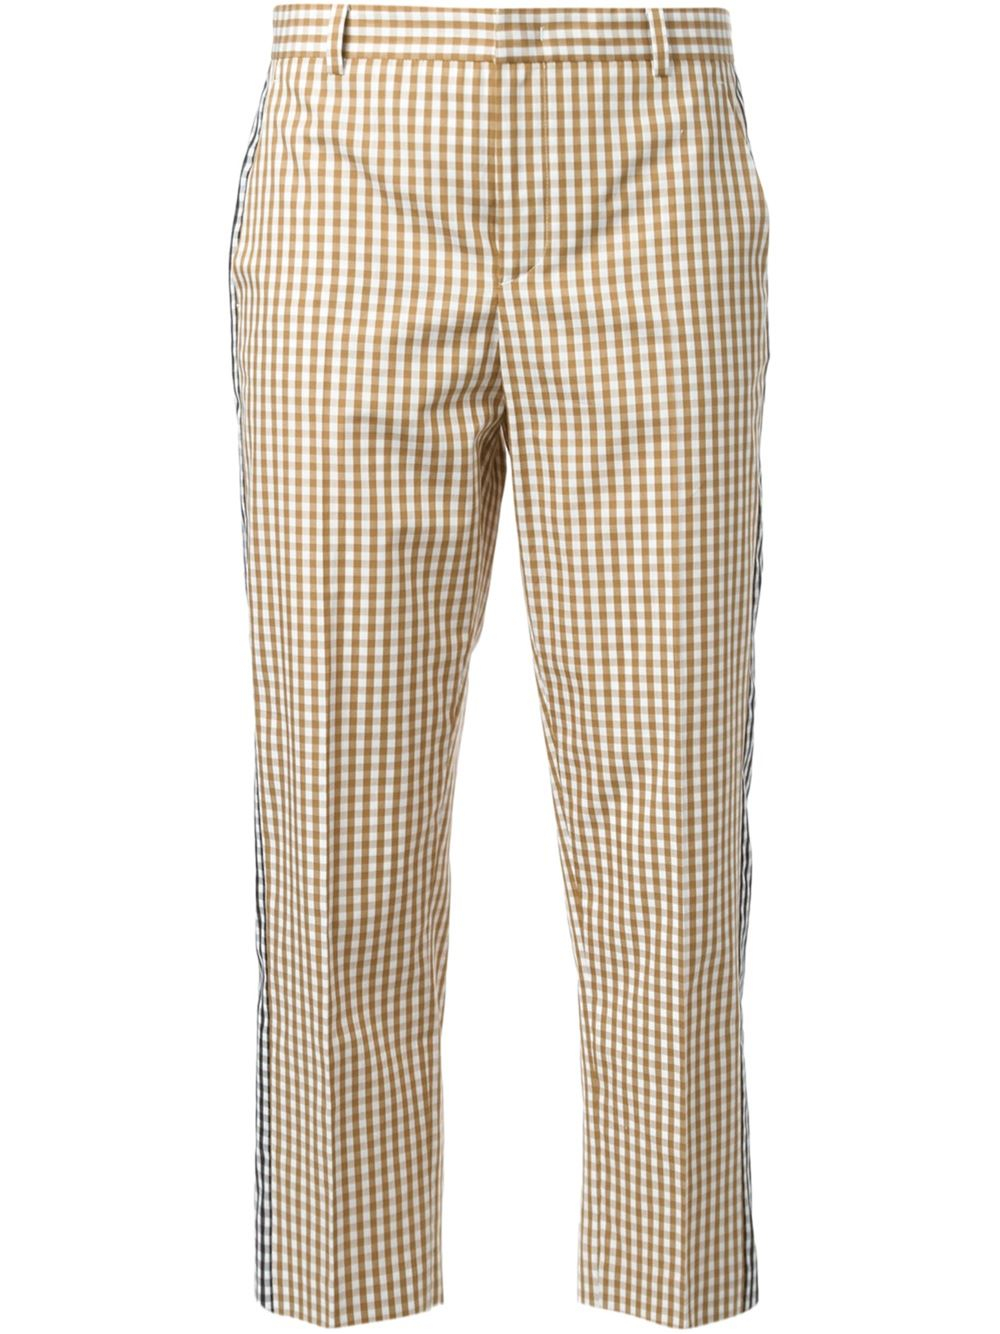 Lyst - N°21 Cropped Gingham Check Trousers in Brown